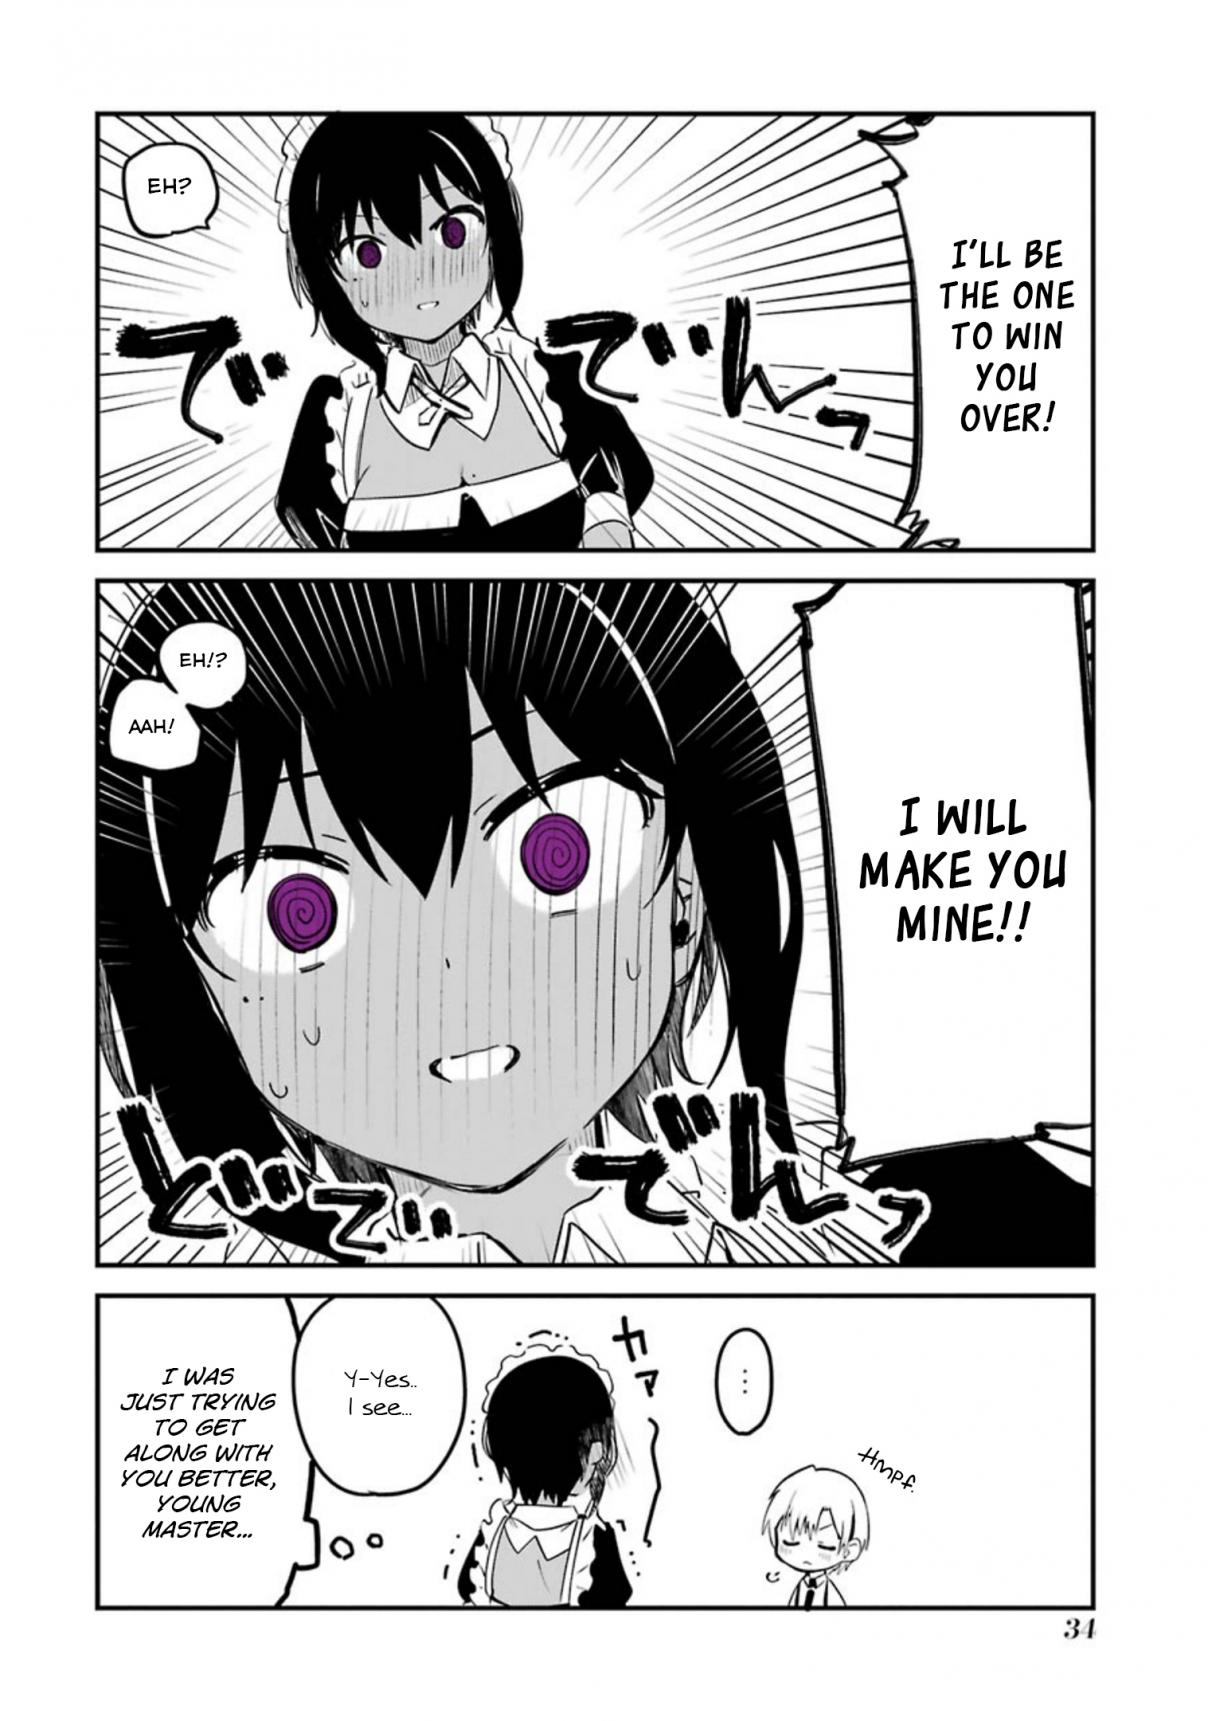 My Recently Hired Maid is Suspicious Vol. 1 Ch. 1.3